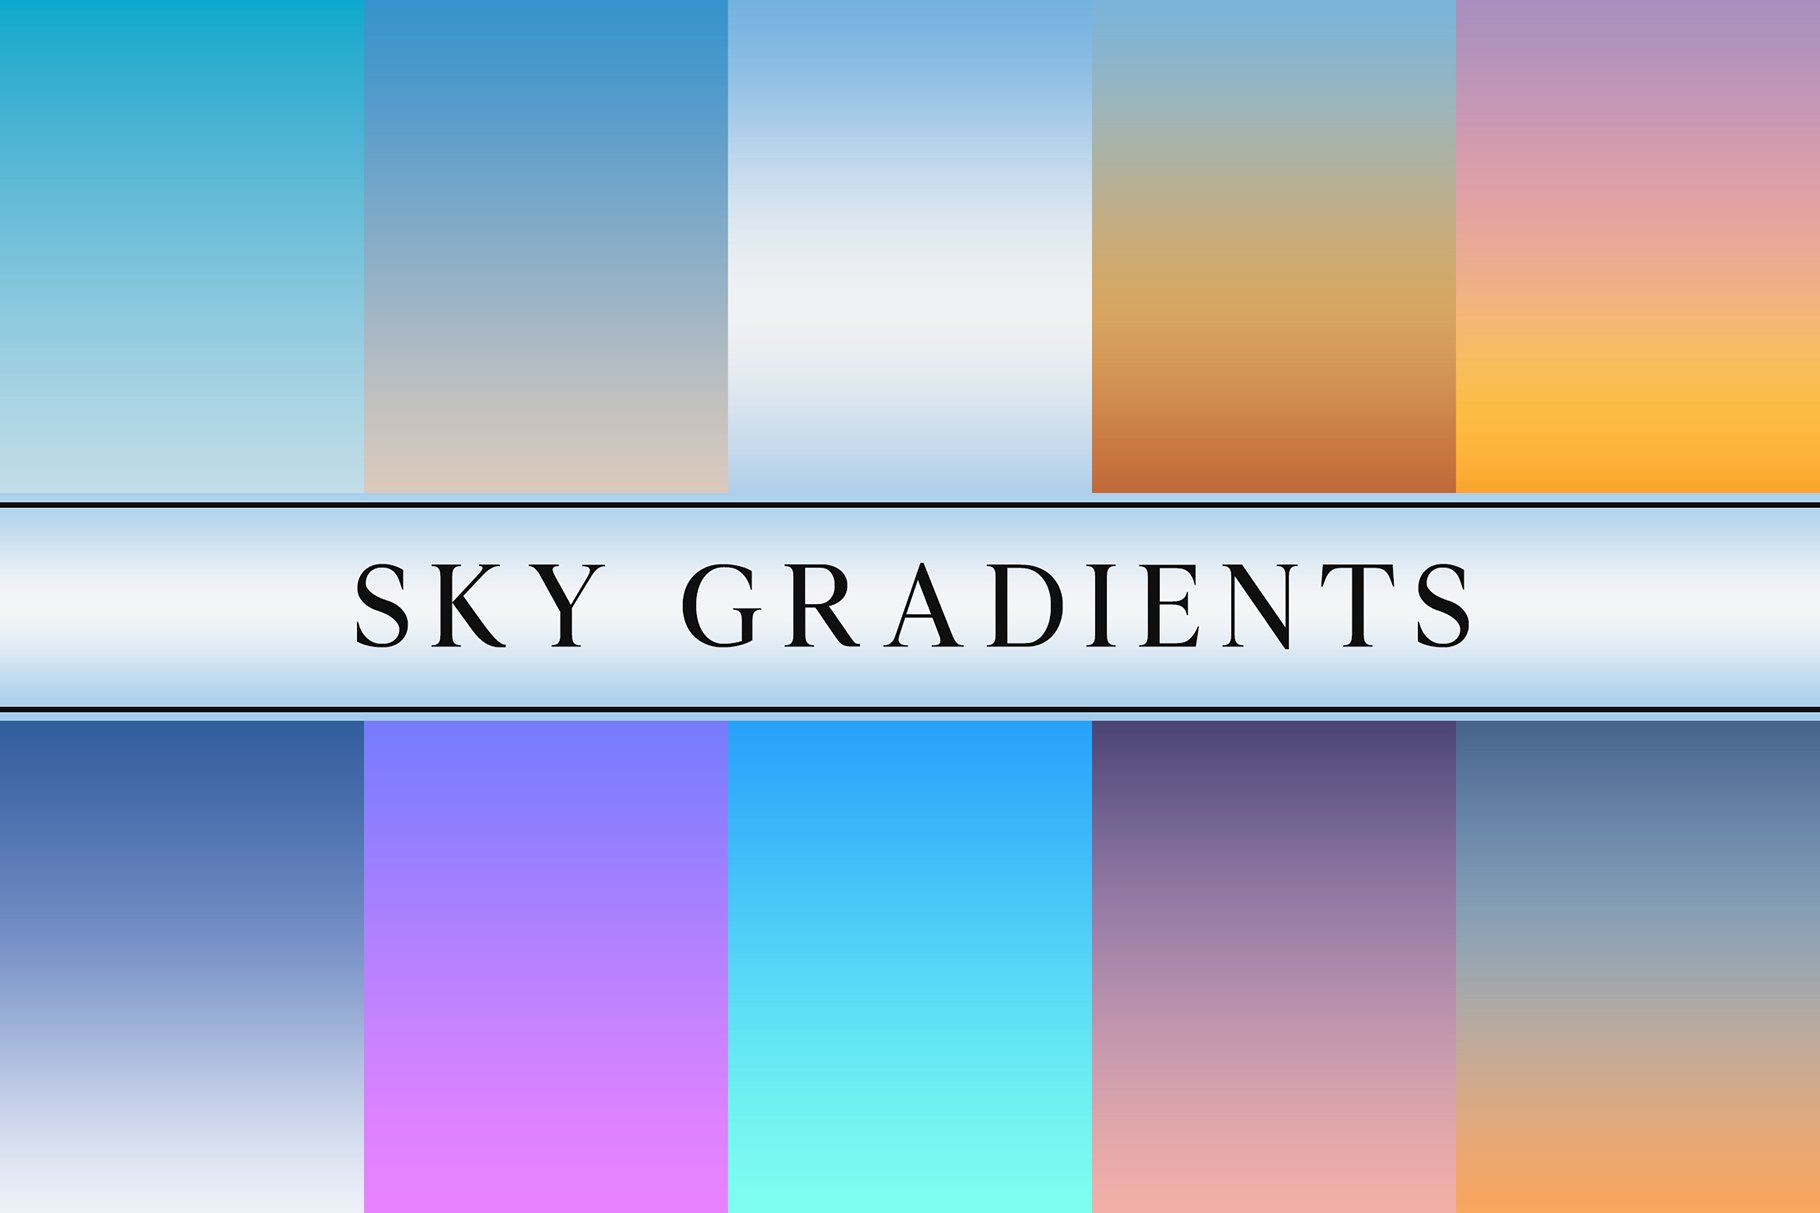 Sky Gradientscover image.